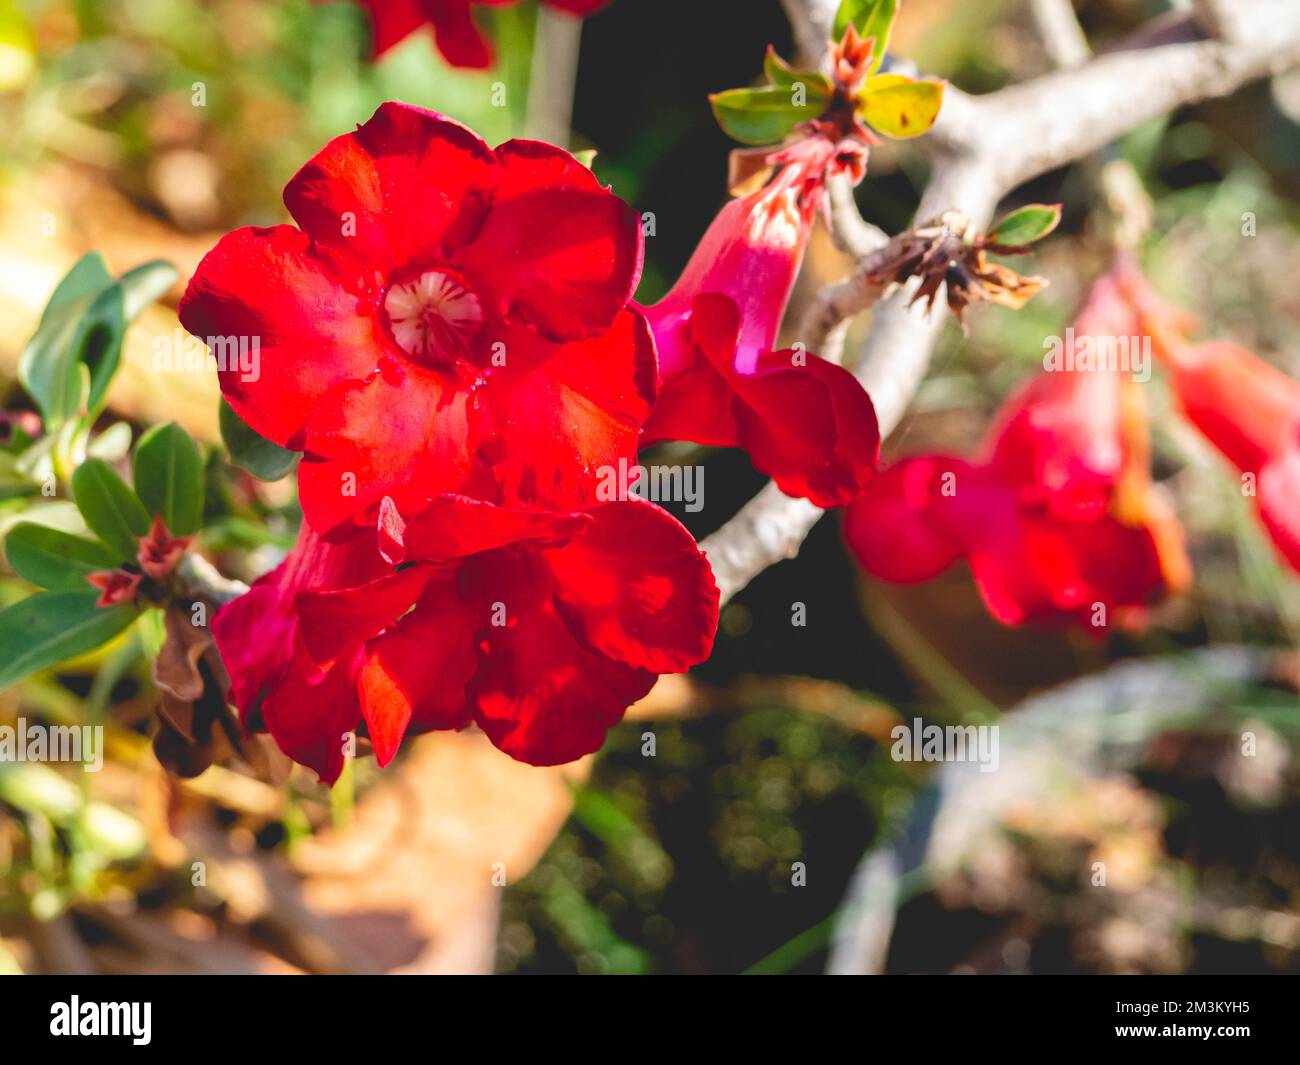 A bunch of red flowers and leaves Stock Photo